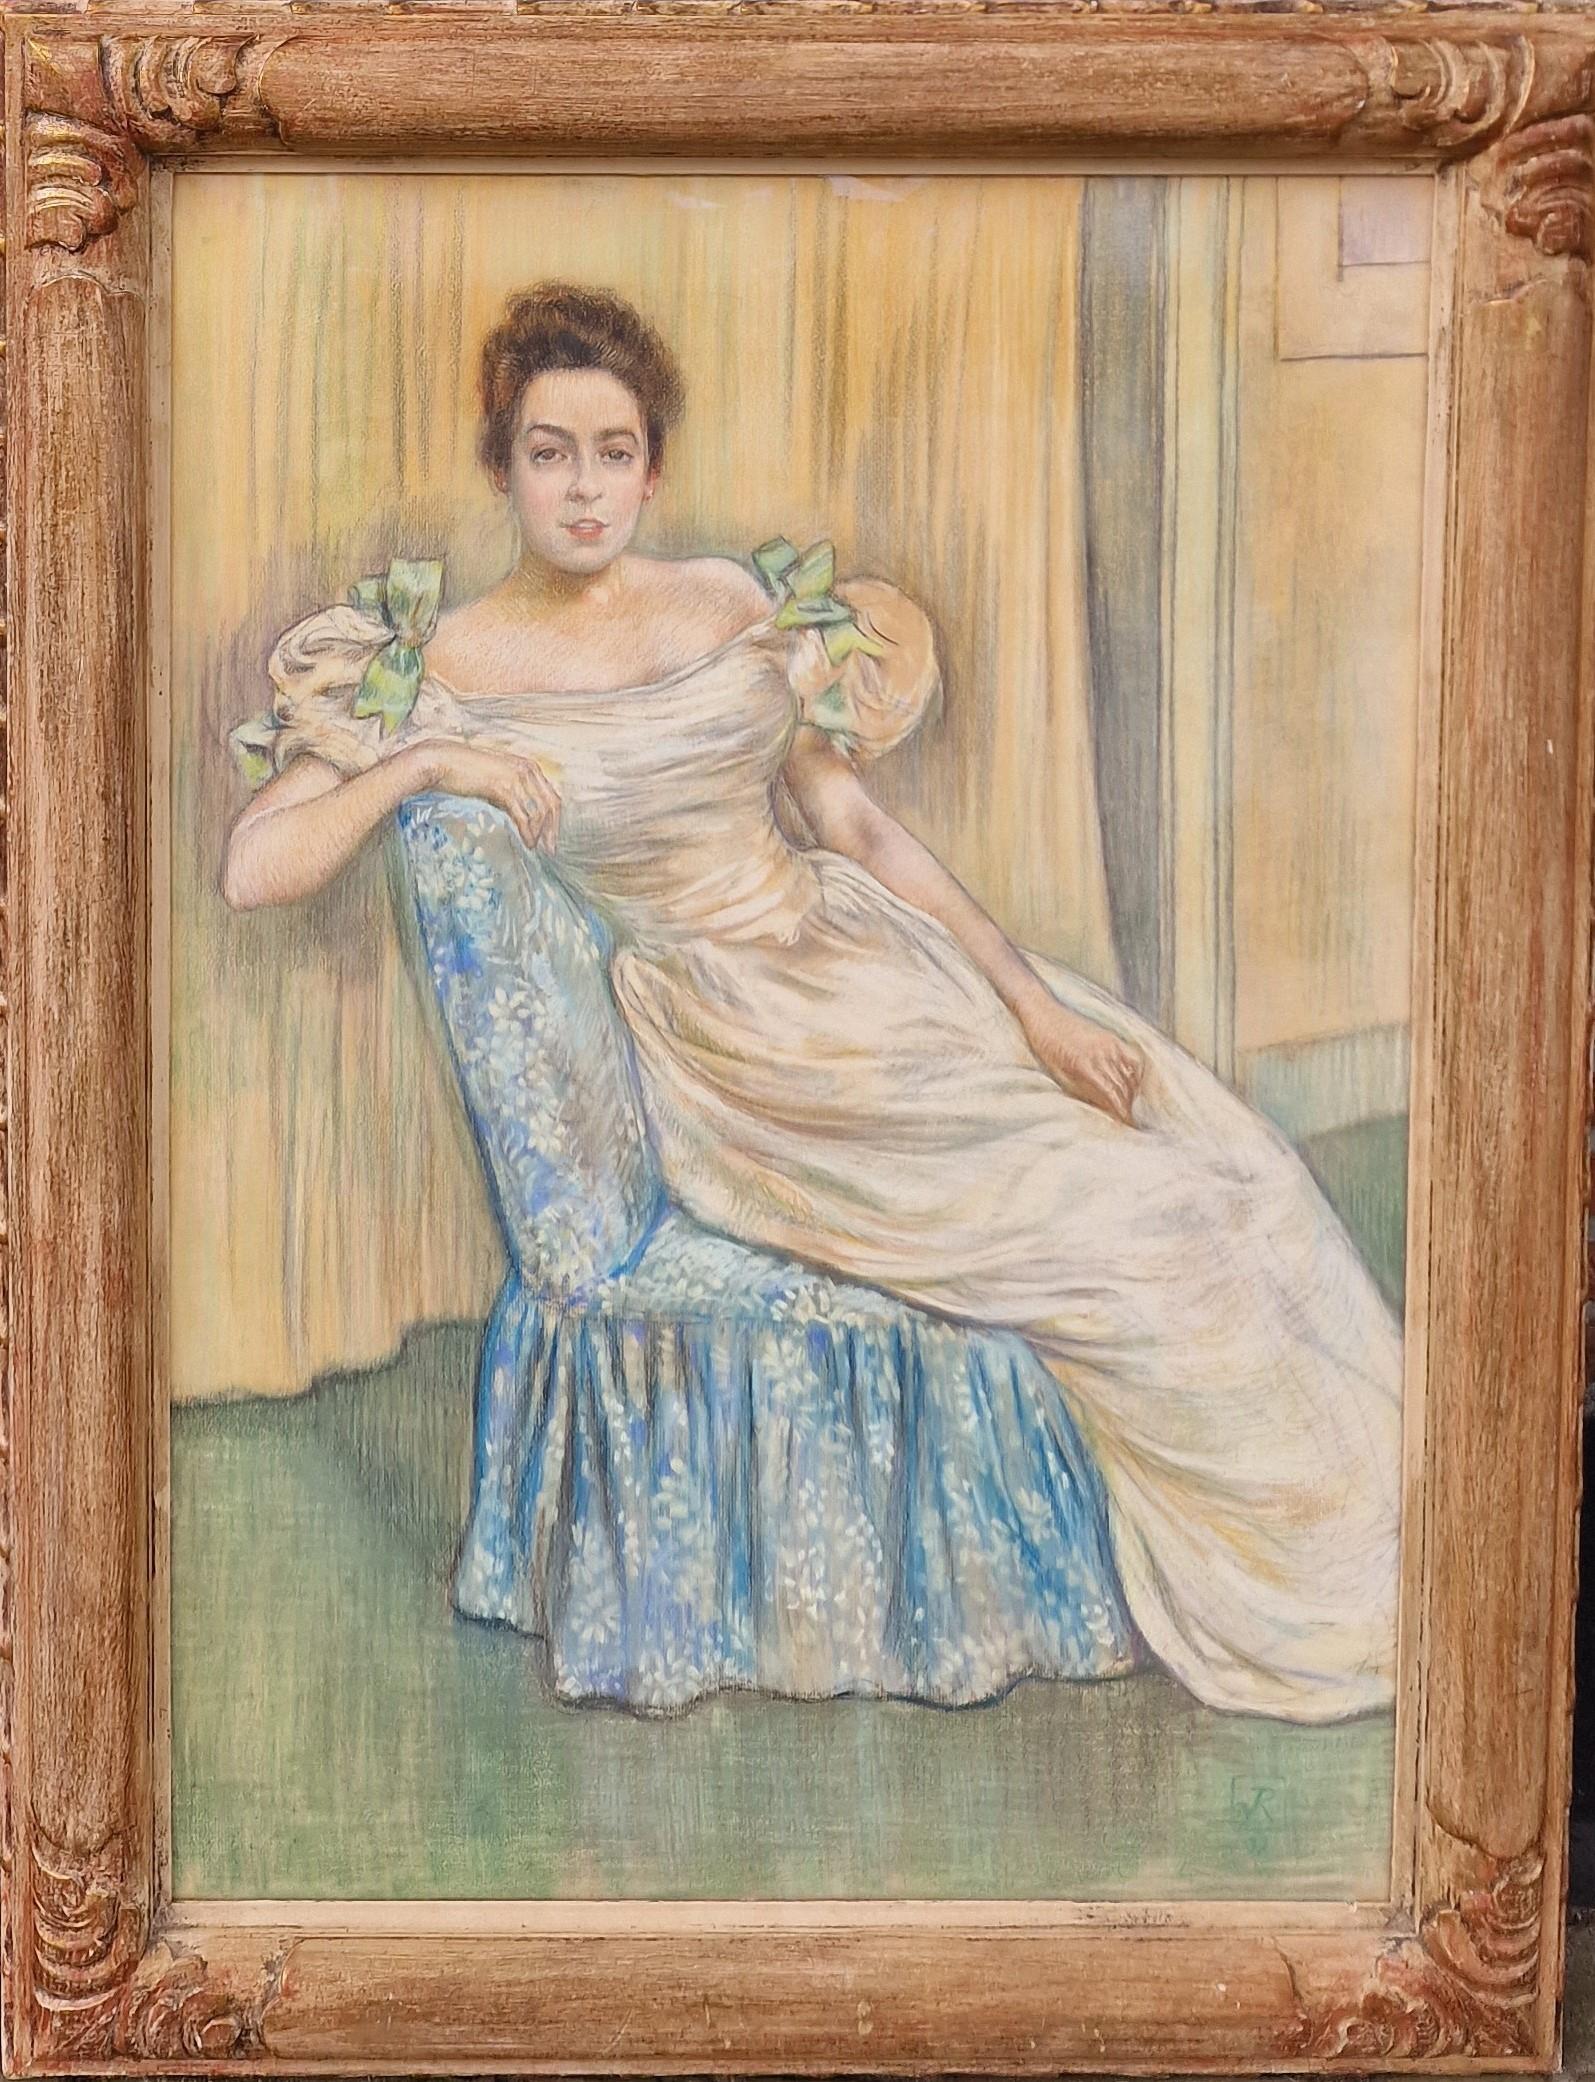 THEO VAN RYSSELBERGHE
Gent 1862-1926 Saint-Clair, Var

LES RUBANS VERTS
Portrait of Marquerite Mommen-Ithiers
1897

Pastel on paper
90 x 65 cm. 
Signed and dated: lower right with monogram ‘97 Portrait of Marquerite Mommen-Ithiers'

Provenance: